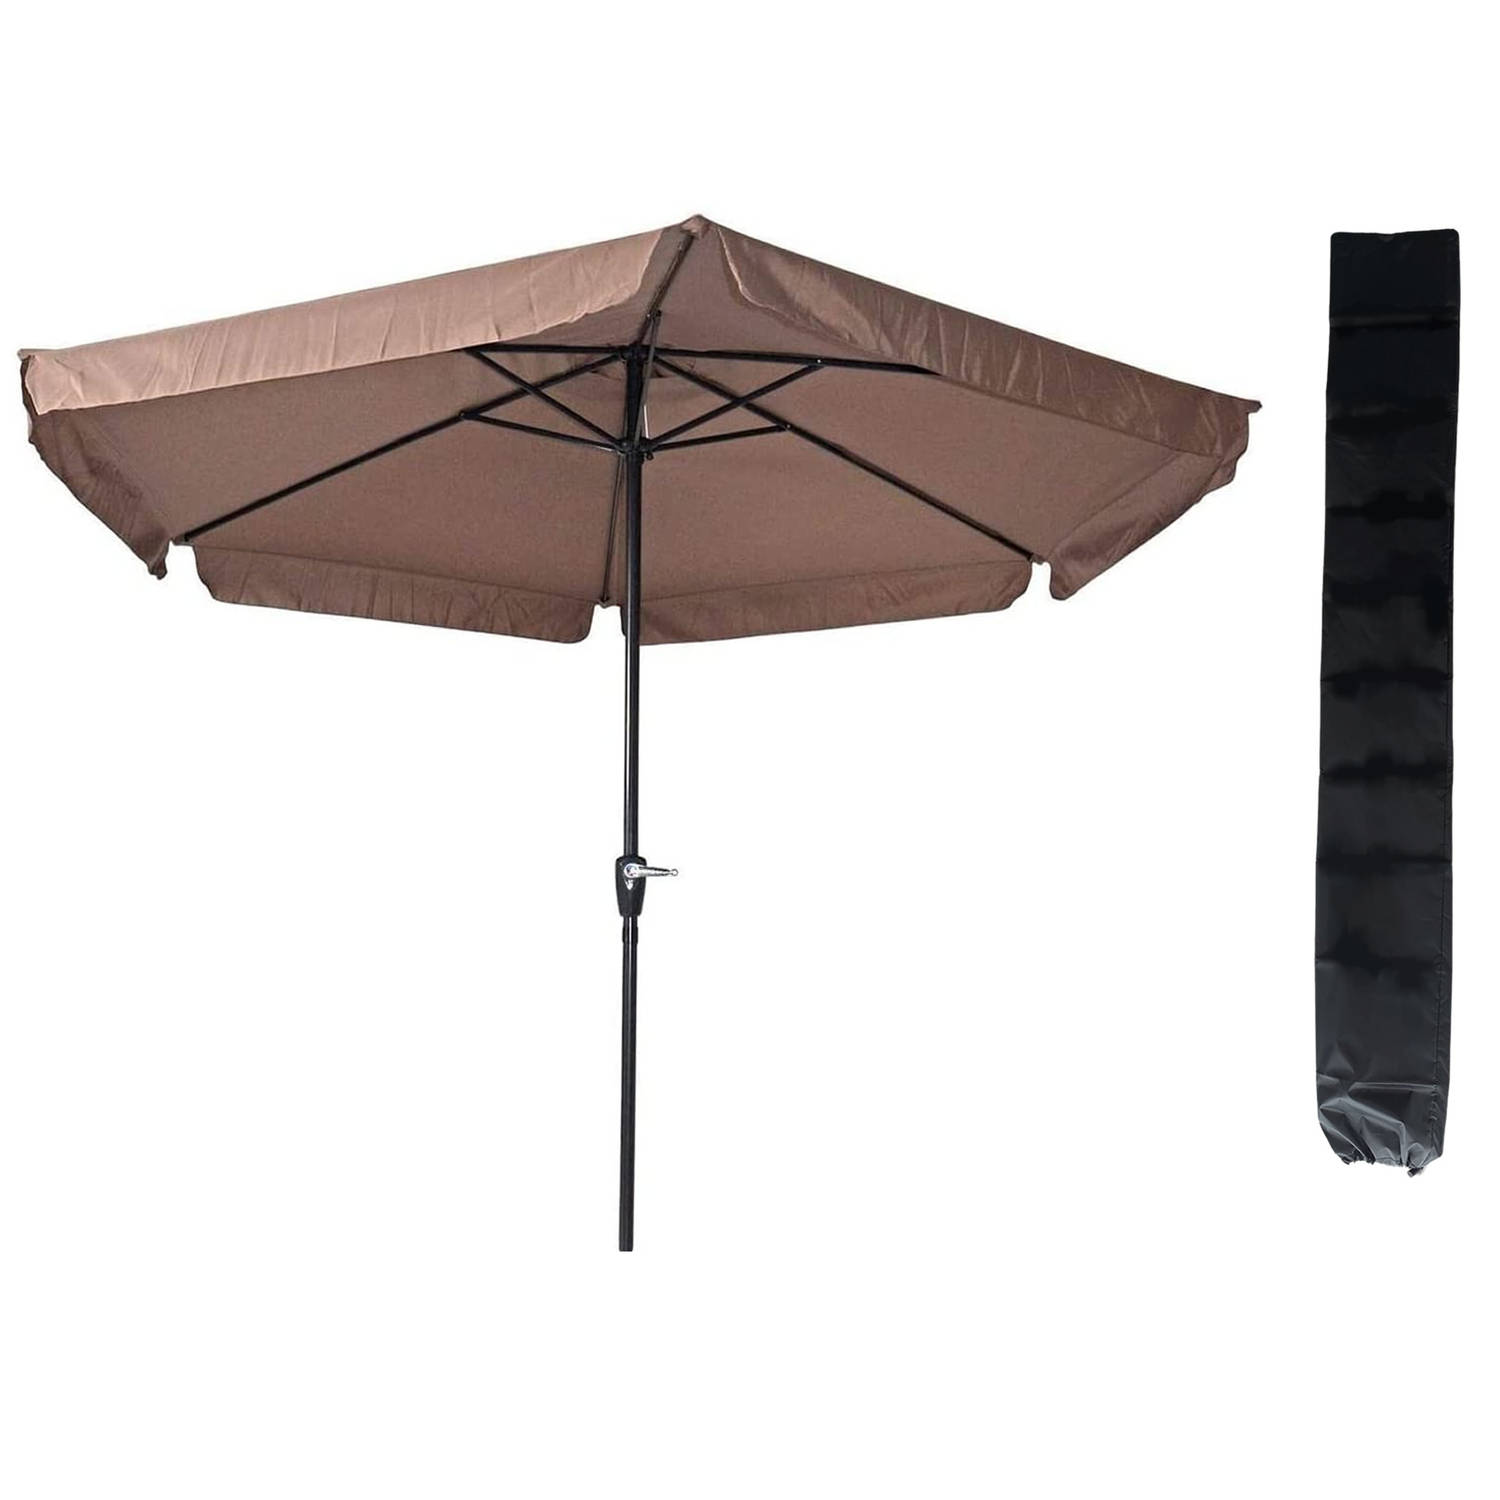 Parasol Gemini Taupe Ø300 Cm Inclusief Opberghoes